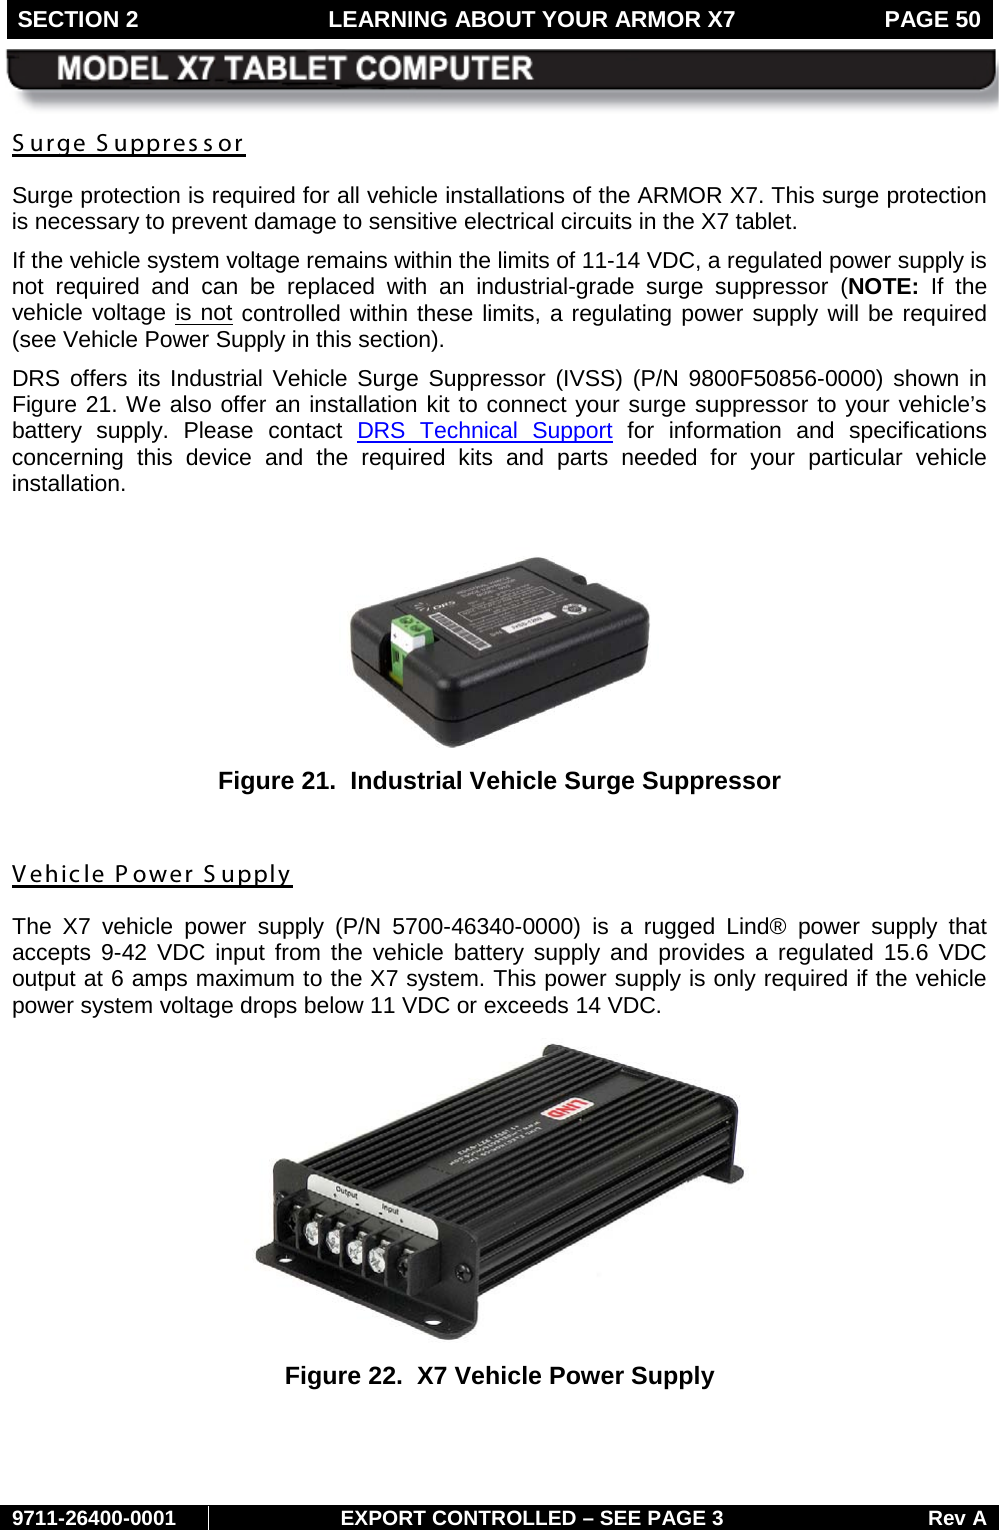 SECTION 2 LEARNING ABOUT YOUR ARMOR X7  PAGE 50        9711-26400-0001 EXPORT CONTROLLED – SEE PAGE 3 Rev A S urge S uppressor Surge protection is required for all vehicle installations of the ARMOR X7. This surge protection is necessary to prevent damage to sensitive electrical circuits in the X7 tablet.  If the vehicle system voltage remains within the limits of 11-14 VDC, a regulated power supply is not required and can be replaced with an industrial-grade surge suppressor  (NOTE:  If the vehicle voltage is not controlled within these limits, a regulating power supply will be required (see Vehicle Power Supply in this section). DRS offers its Industrial Vehicle Surge Suppressor (IVSS) (P/N 9800F50856-0000) shown in Figure 21. We also offer an installation kit to connect your surge suppressor to your vehicle’s battery supply. Please contact DRS Technical Support for  information and specifications concerning this device and the required kits and parts needed for your particular  vehicle installation.   Figure 21.  Industrial Vehicle Surge Suppressor  Vehicle Power S upply The X7 vehicle power supply (P/N 5700-46340-0000) is a rugged Lind® power supply that accepts 9-42 VDC input from the vehicle battery supply and provides a regulated 15.6 VDC output at 6 amps maximum to the X7 system. This power supply is only required if the vehicle power system voltage drops below 11 VDC or exceeds 14 VDC.  Figure 22.  X7 Vehicle Power Supply   